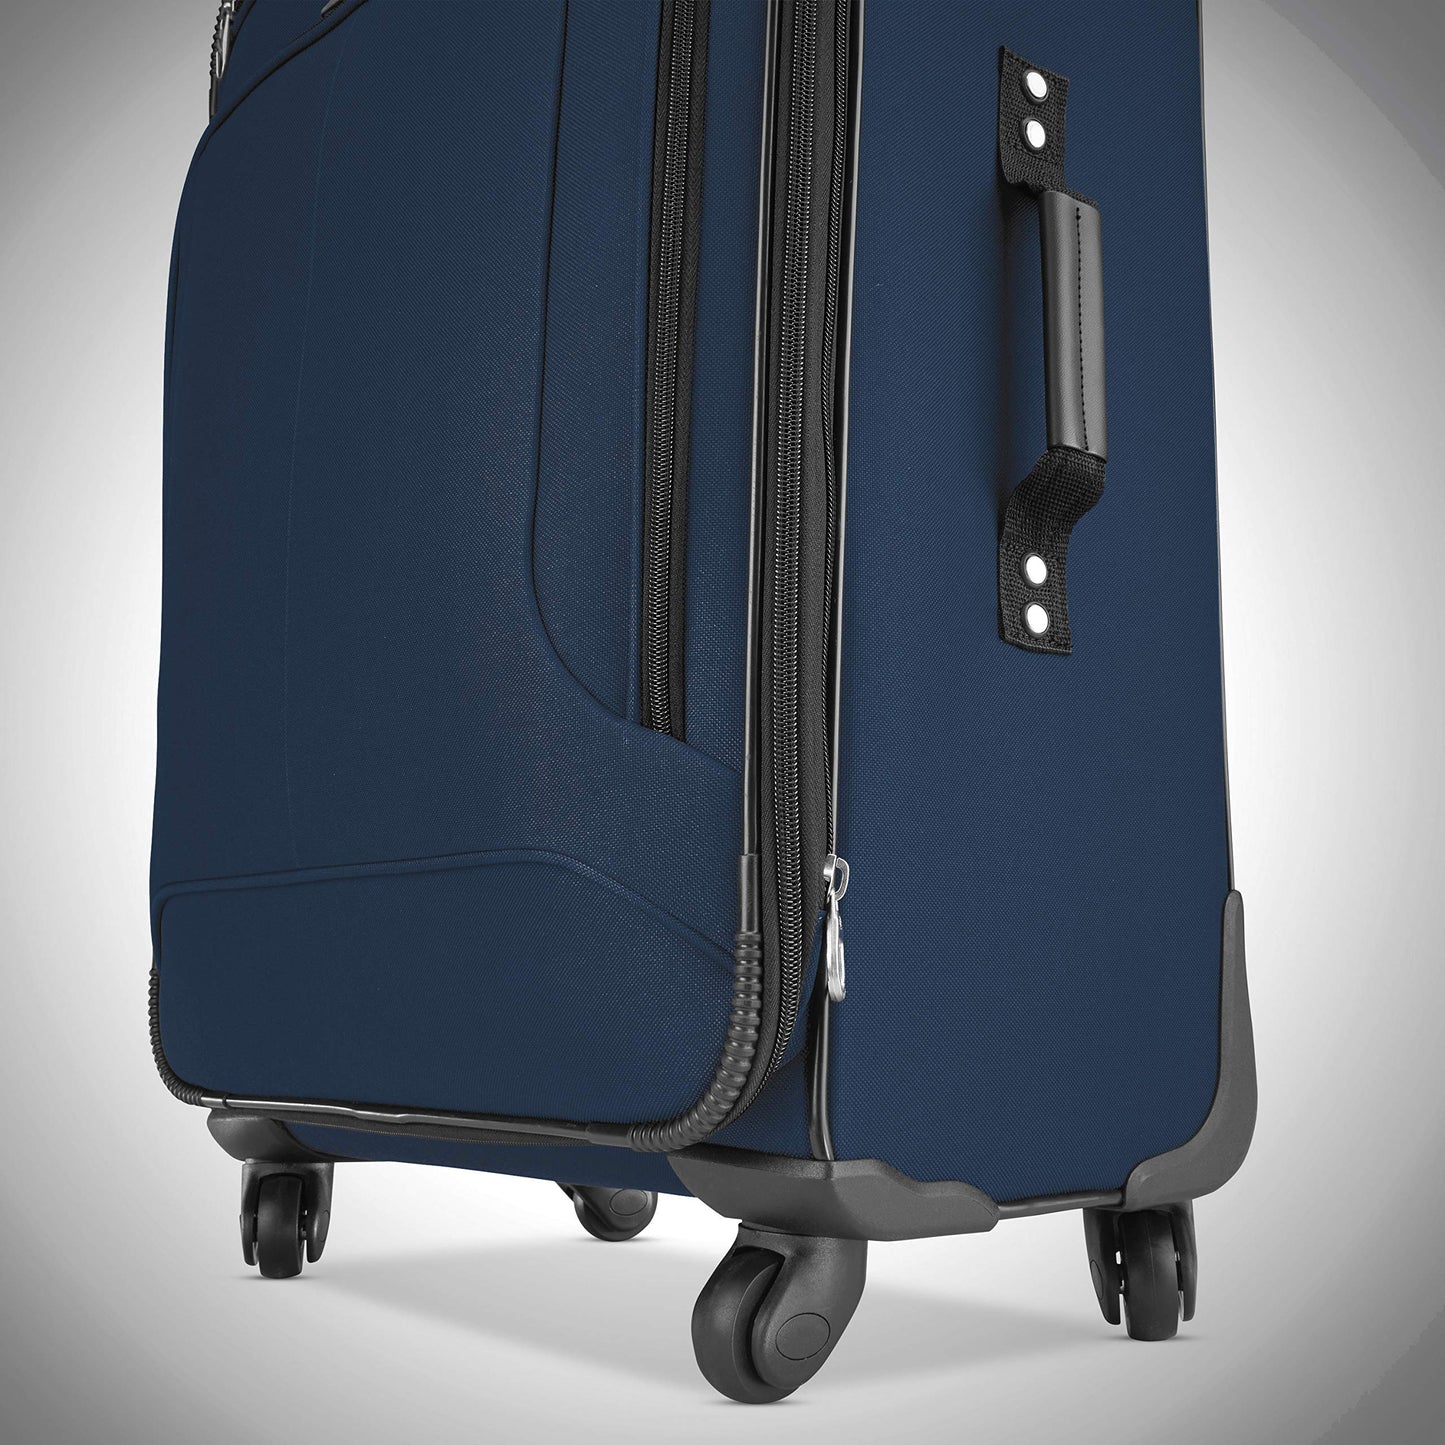 American Tourister Pop Max Softside Luggage with Spinner Wheels (Navy, Checked-Medium 25-Inch)